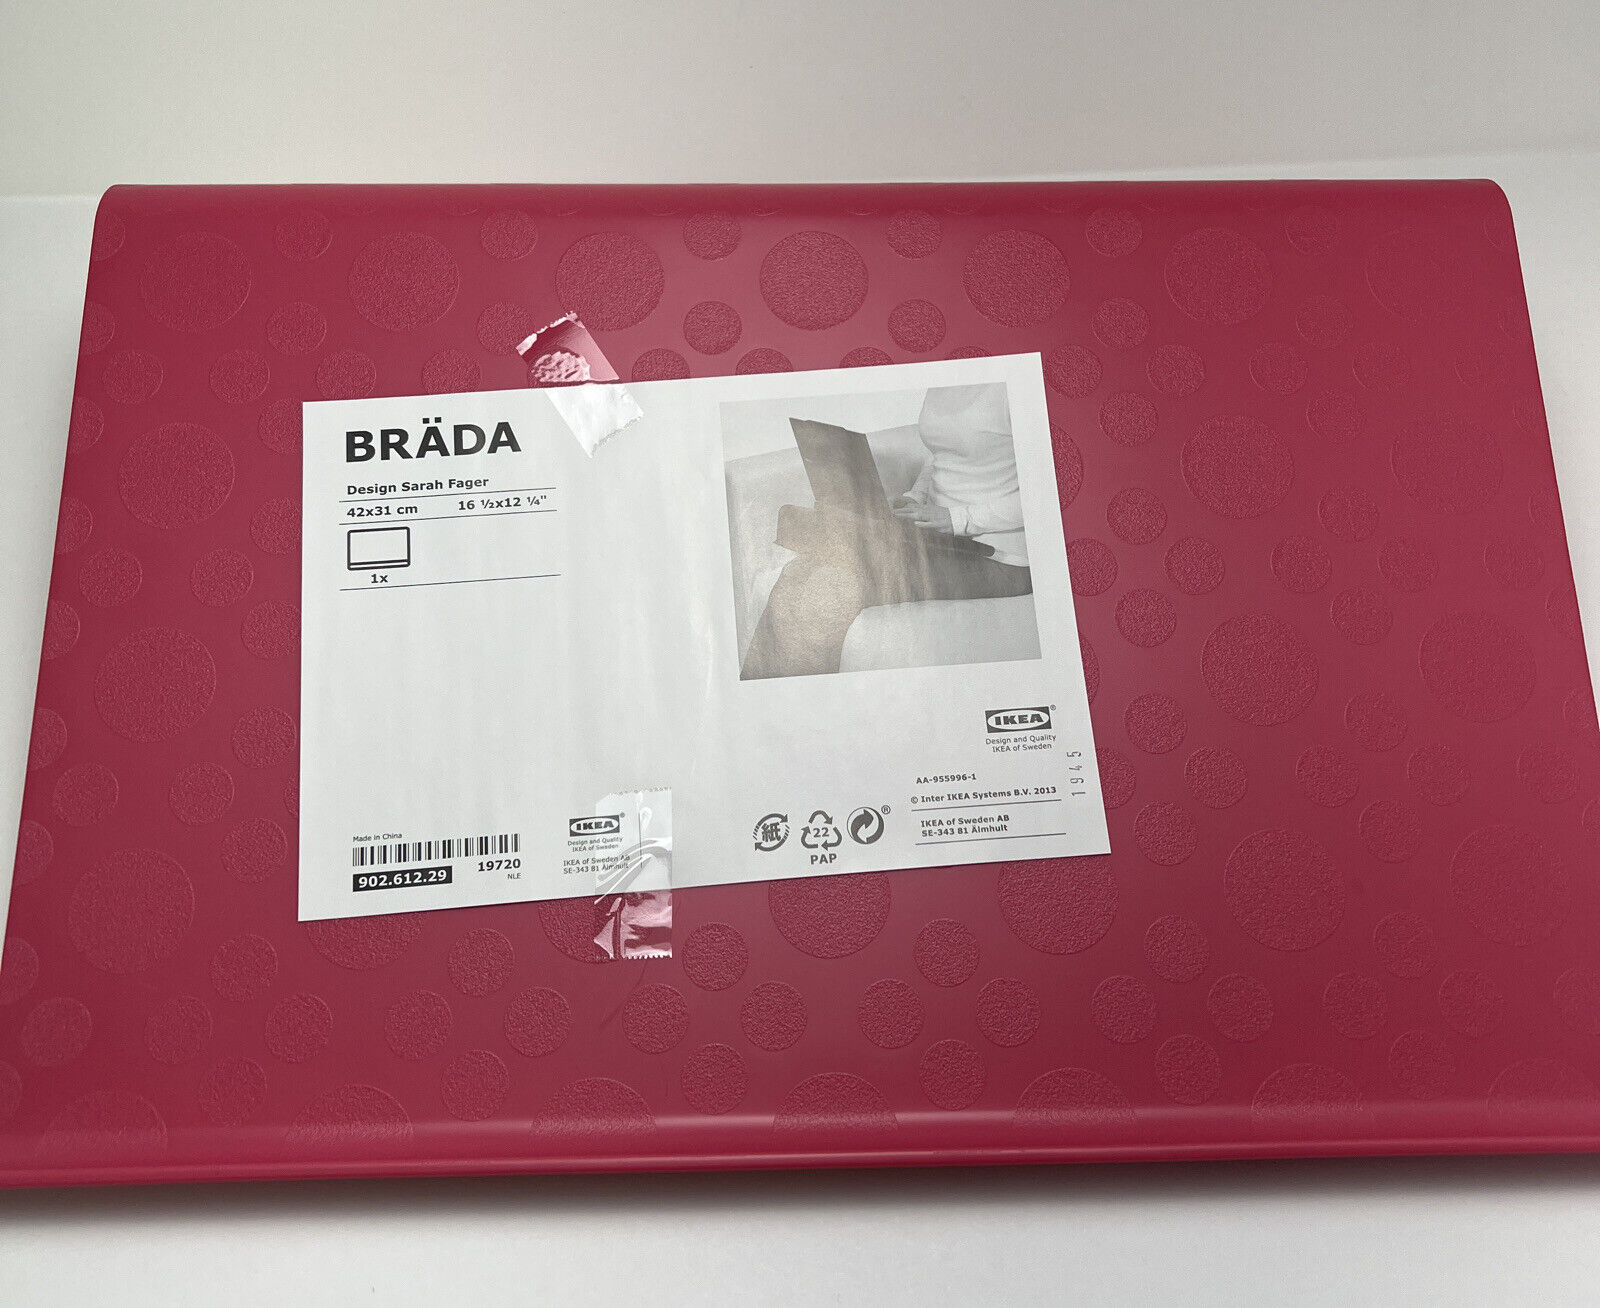 NEW Ikea Brada Laptop Tablet Support Desk Table Reading PINK 902.612.29